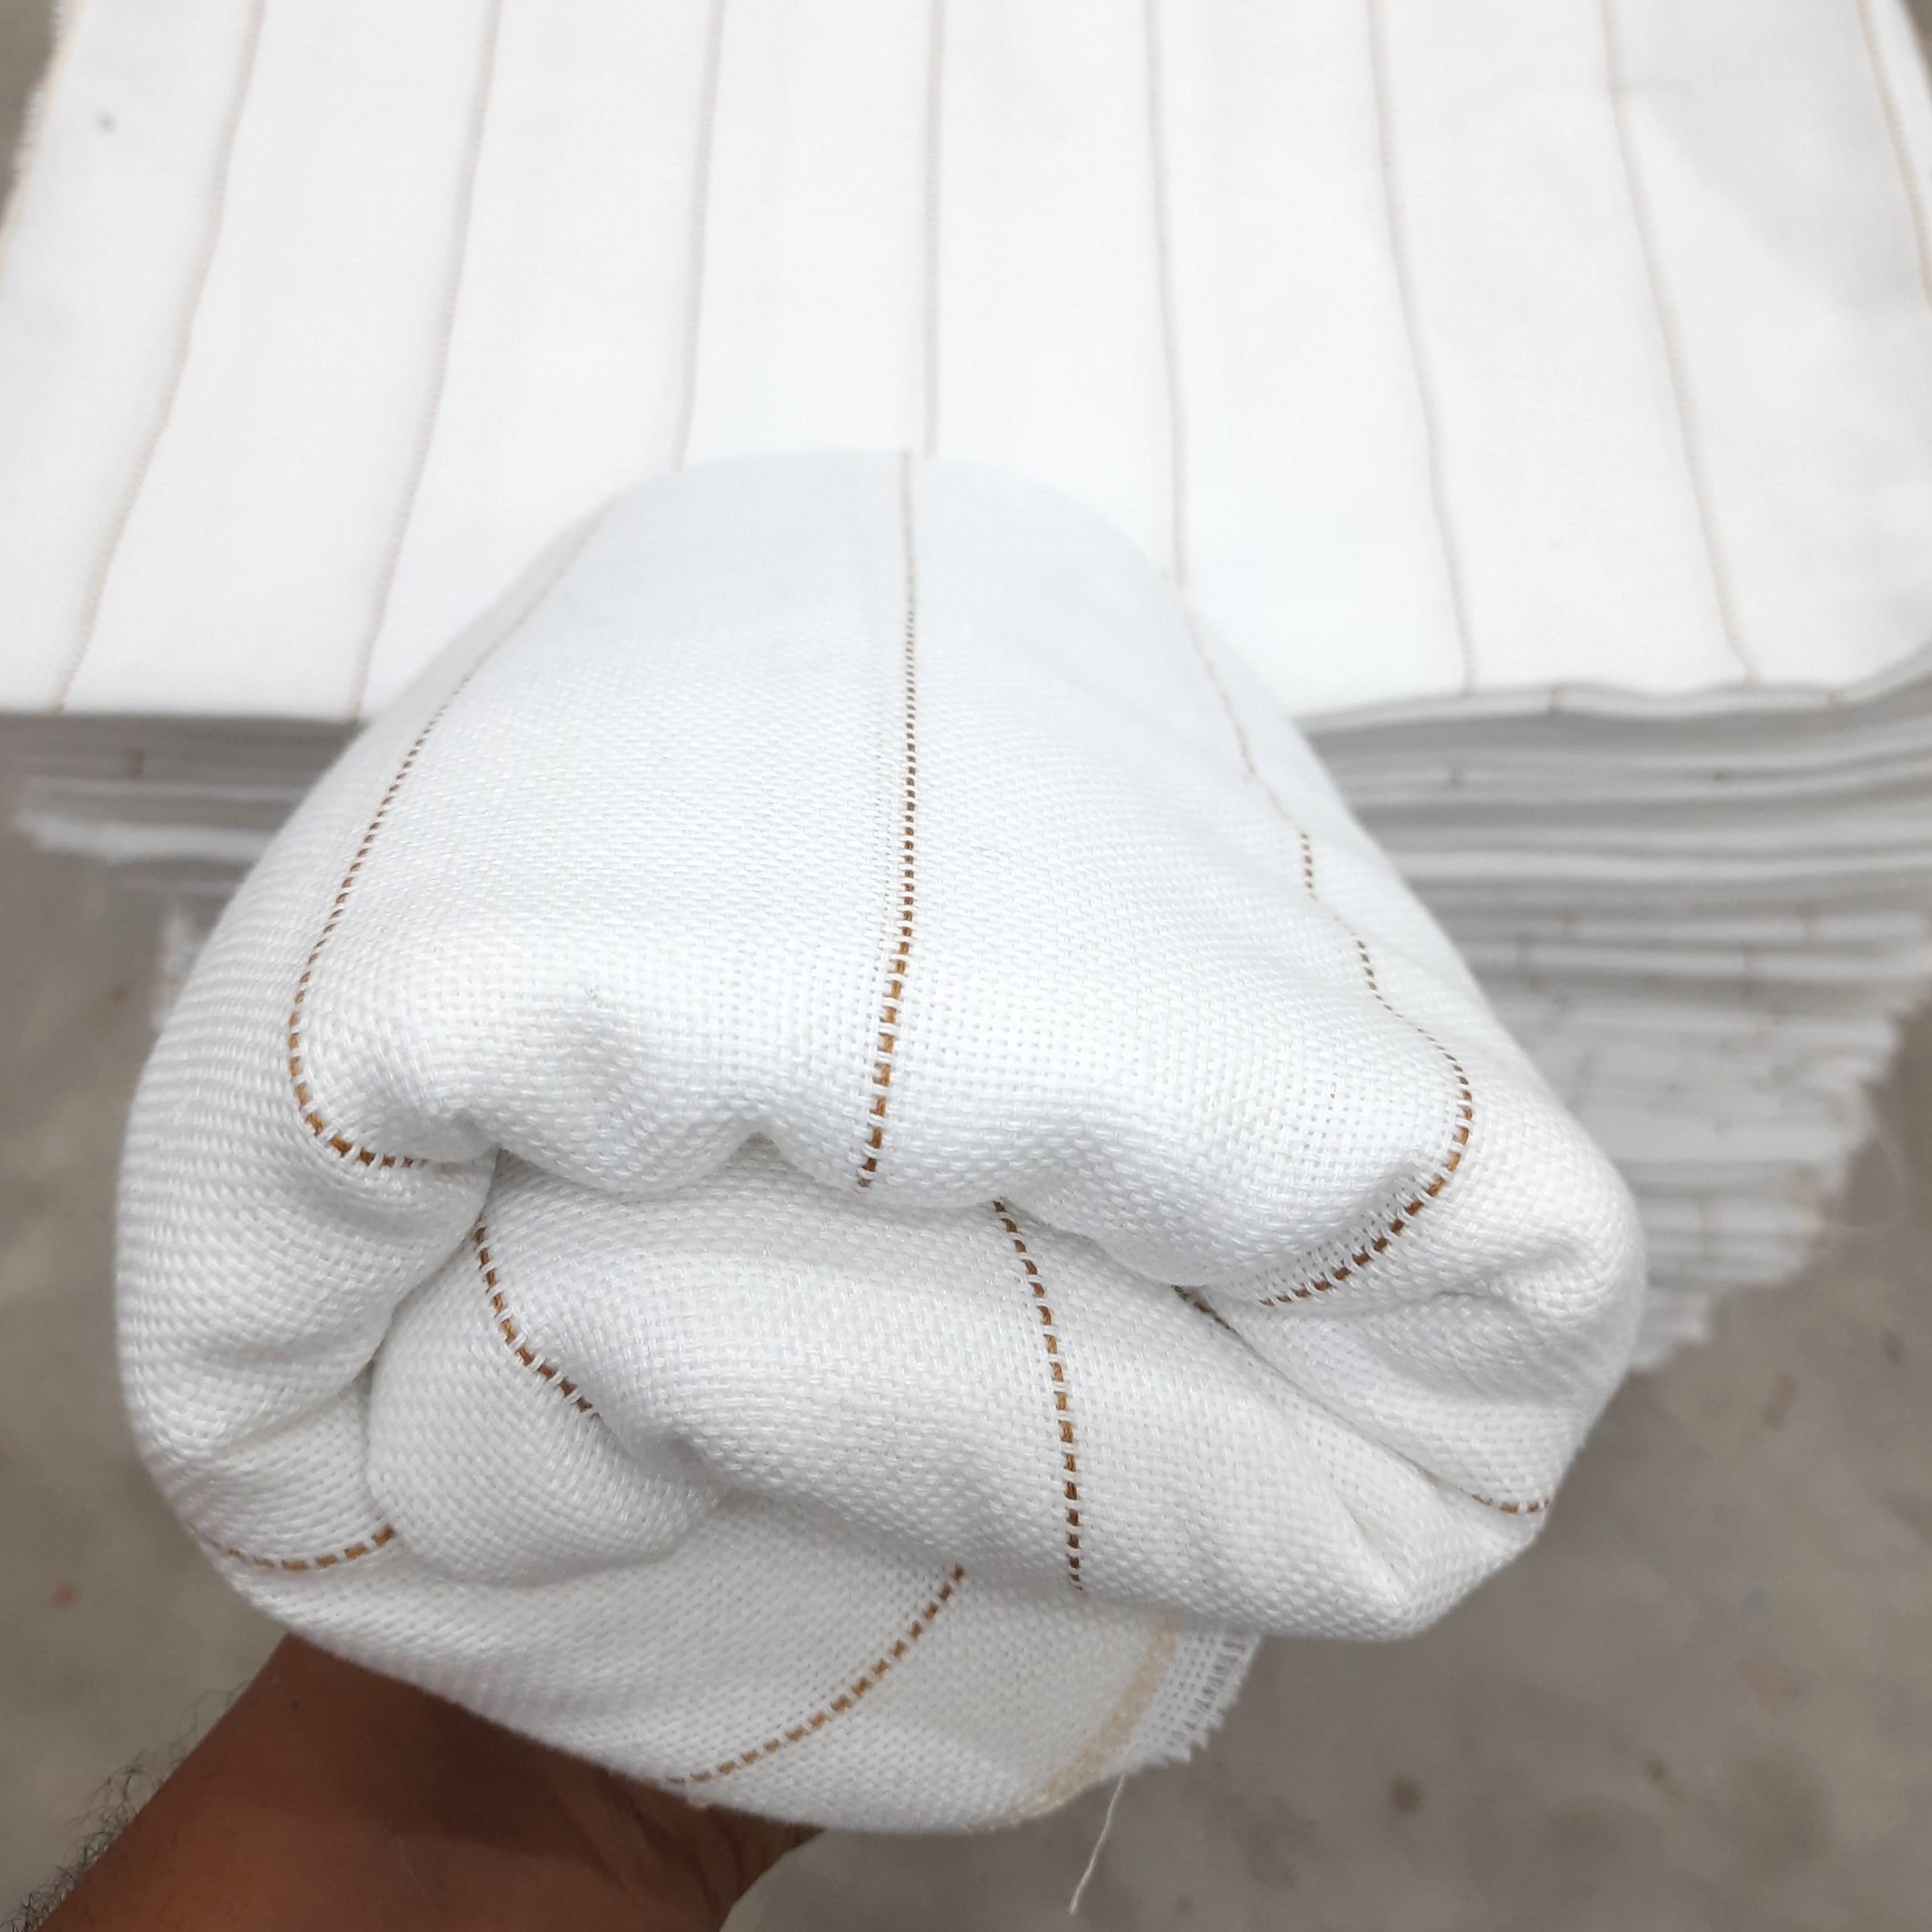 Primary Tufting Cloth in White - 100m2 [Wholesale]